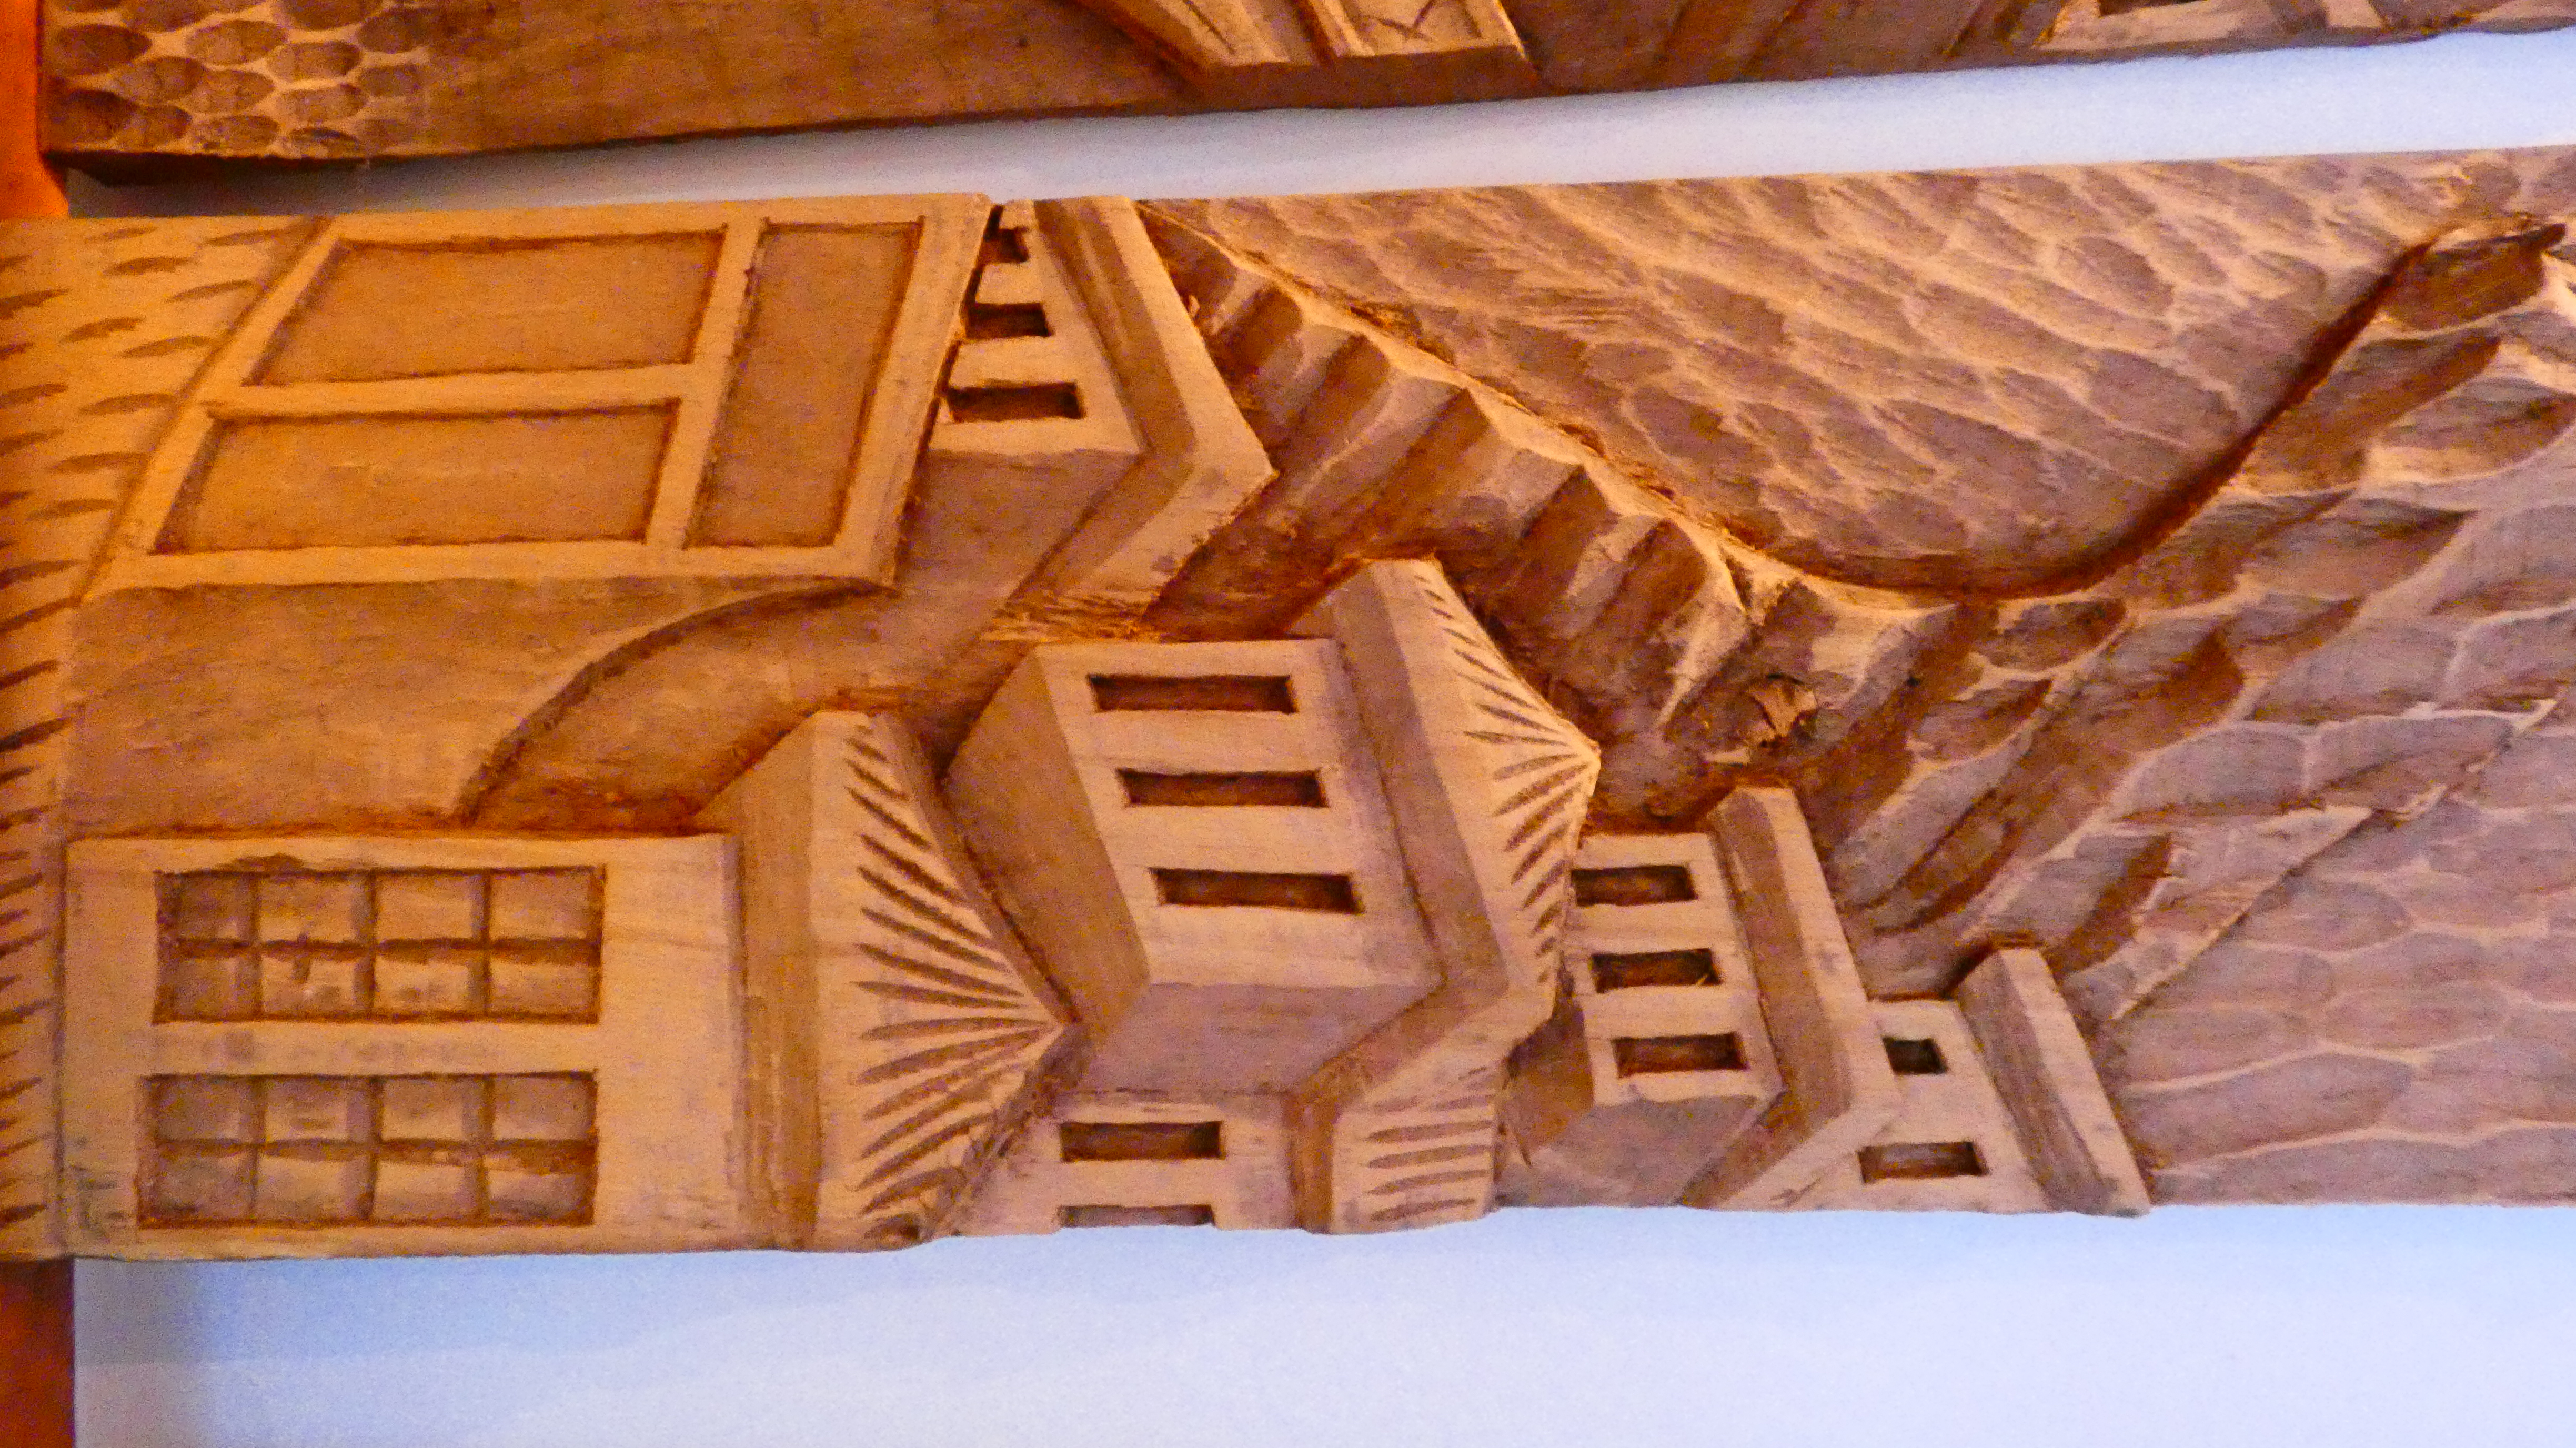 Wood Carving | 1001 Albanian Adventures